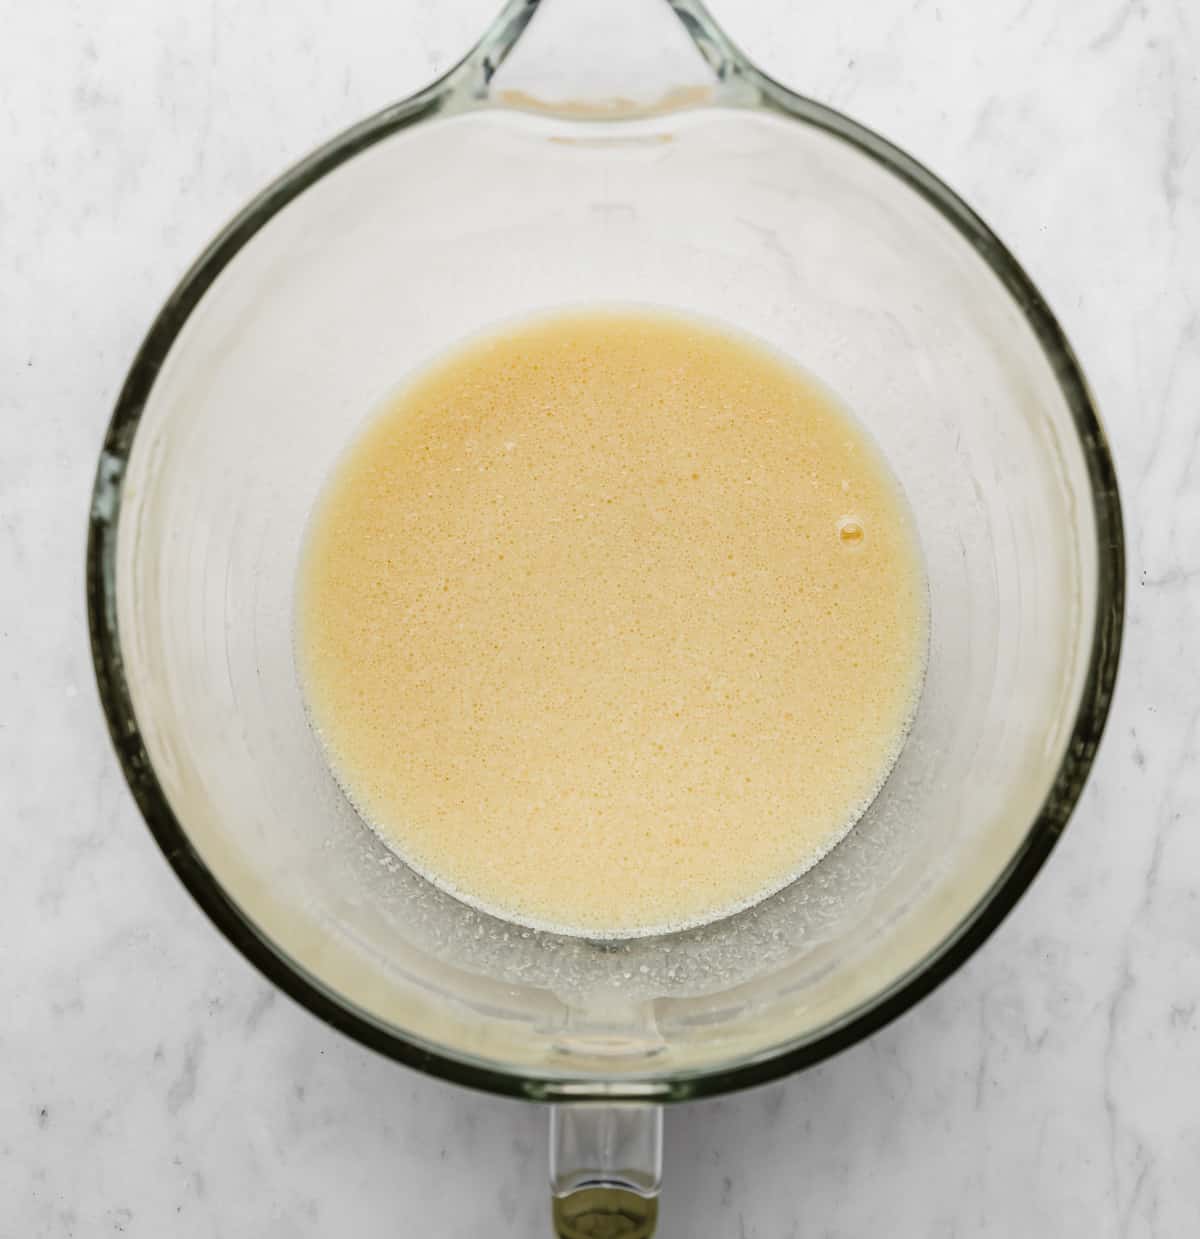 A light yellow colored liquid mixture in a glass mixing bowl on a white marble background.